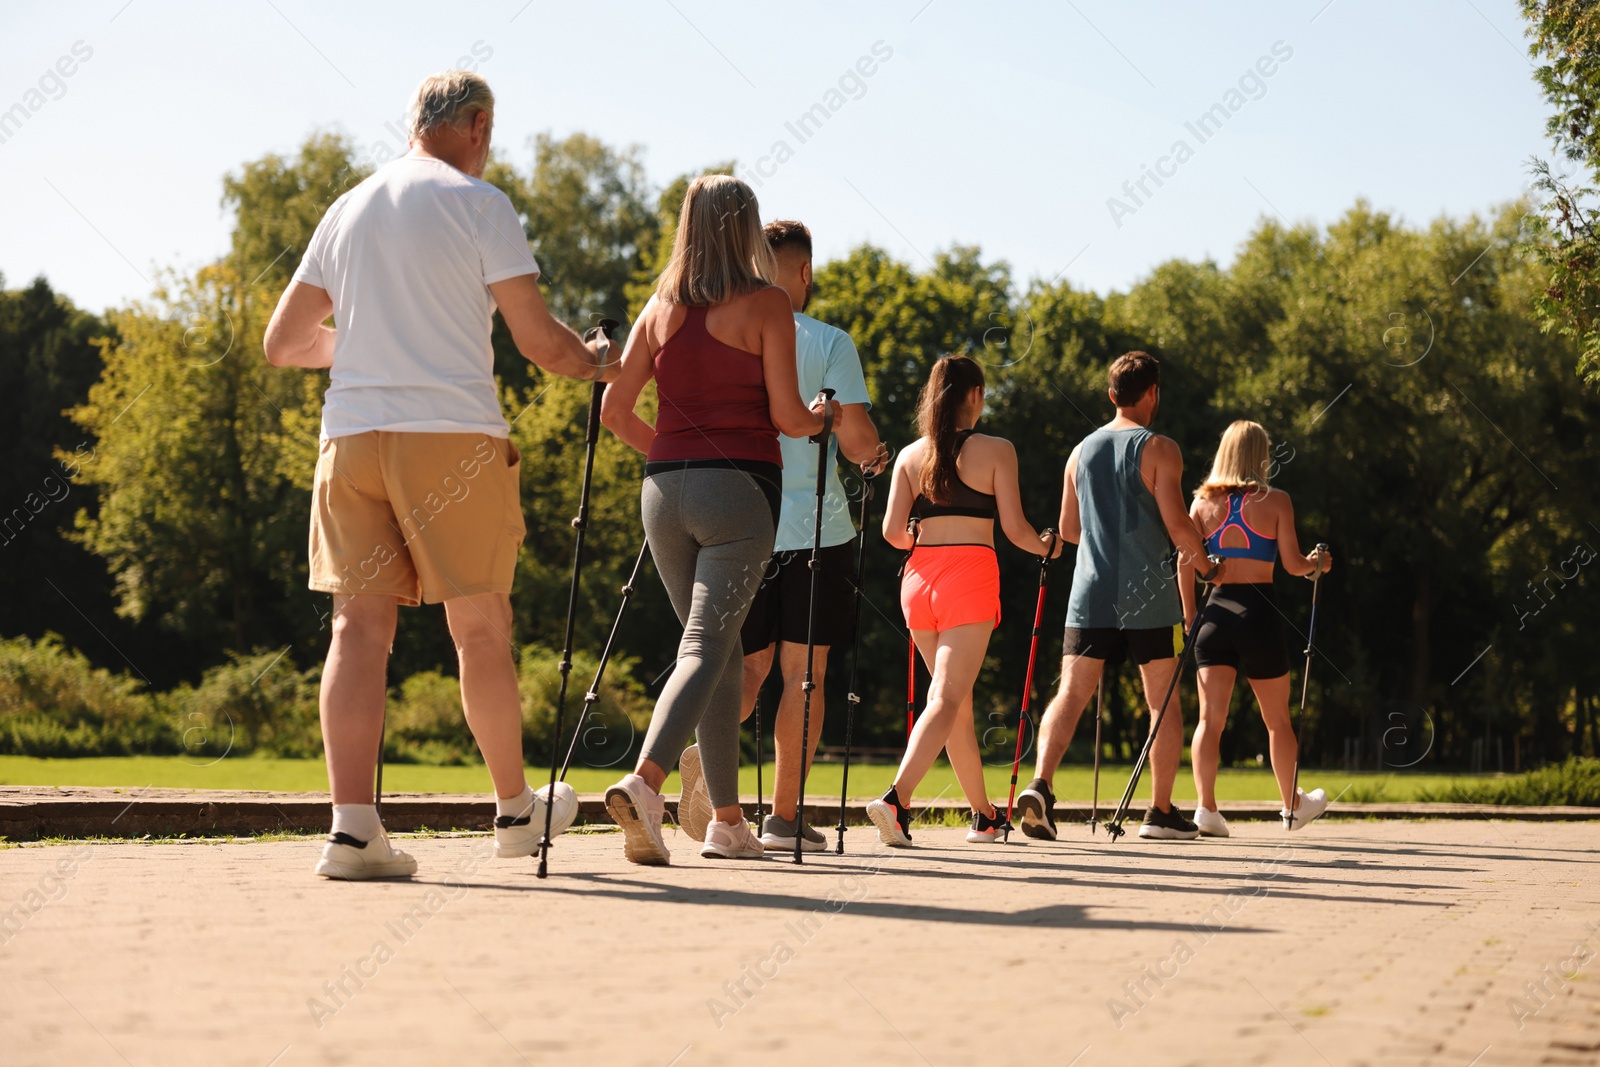 Photo of Group of people practicing Nordic walking with poles in park on sunny day, back view